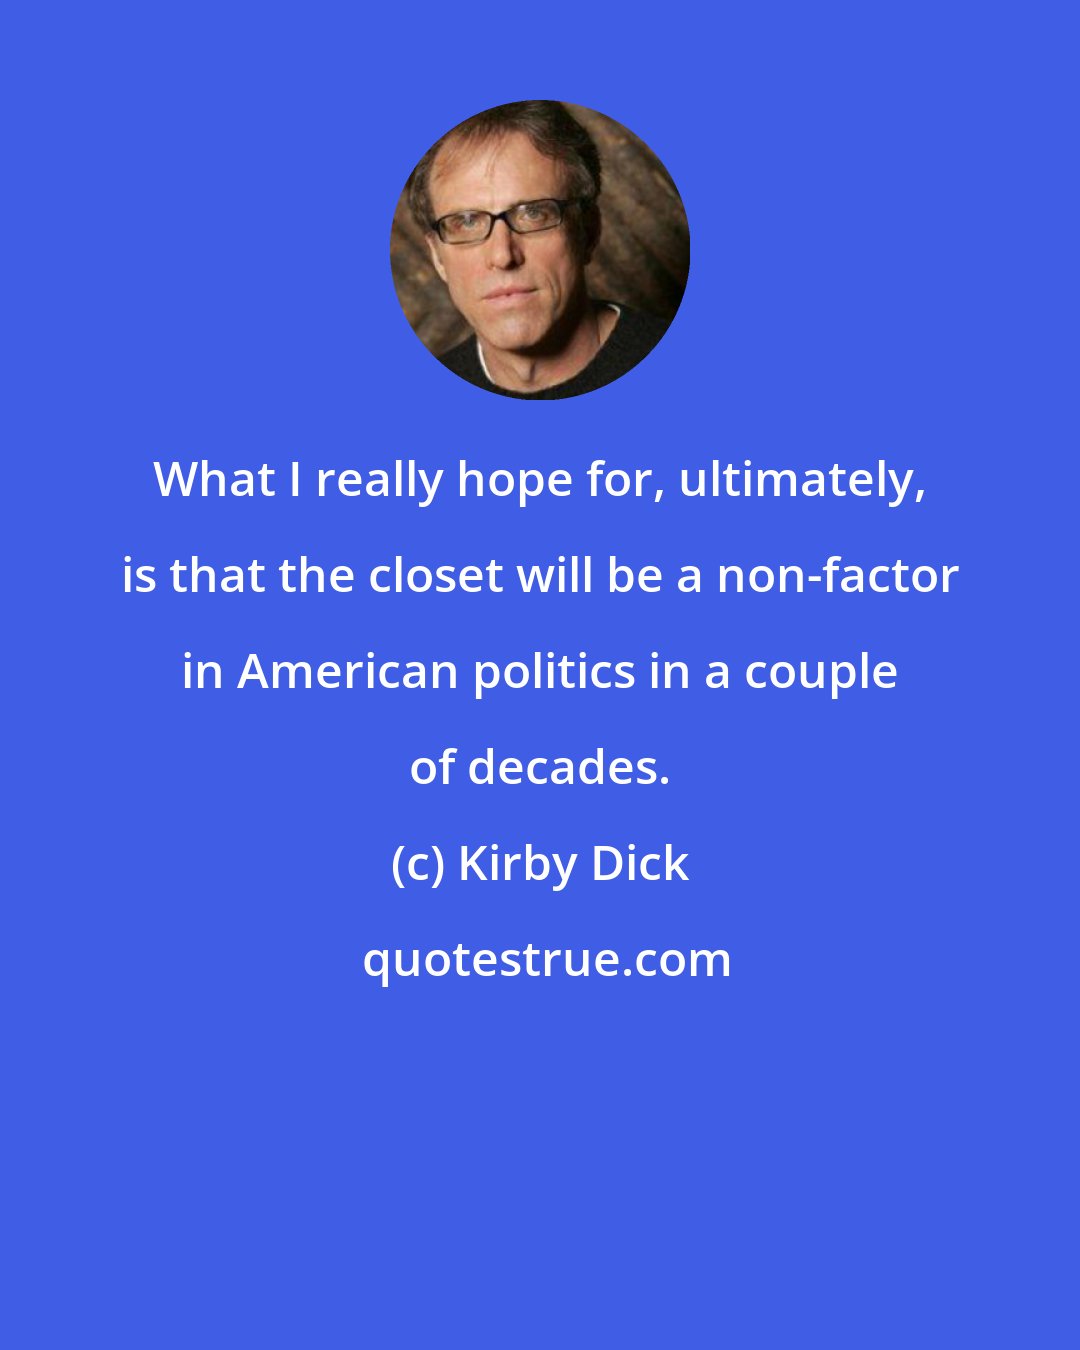 Kirby Dick: What I really hope for, ultimately, is that the closet will be a non-factor in American politics in a couple of decades.